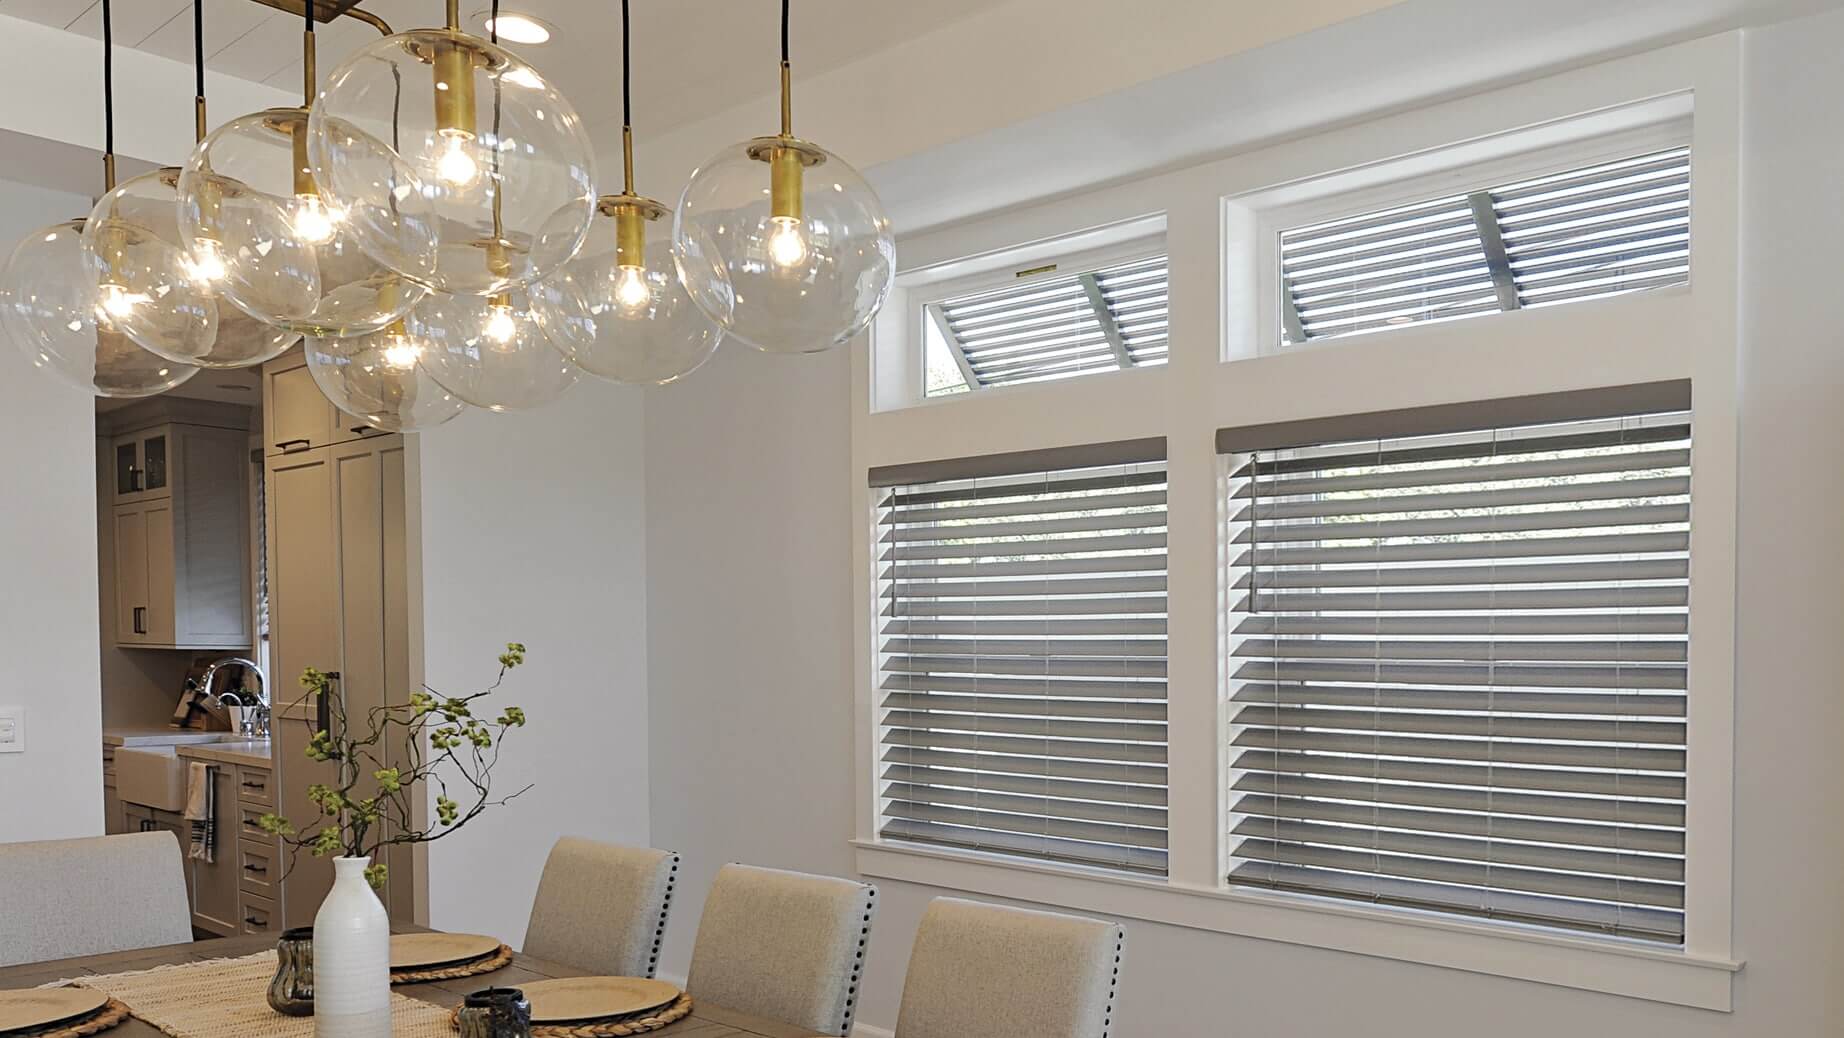 blinds | window treatments in hutto, tx